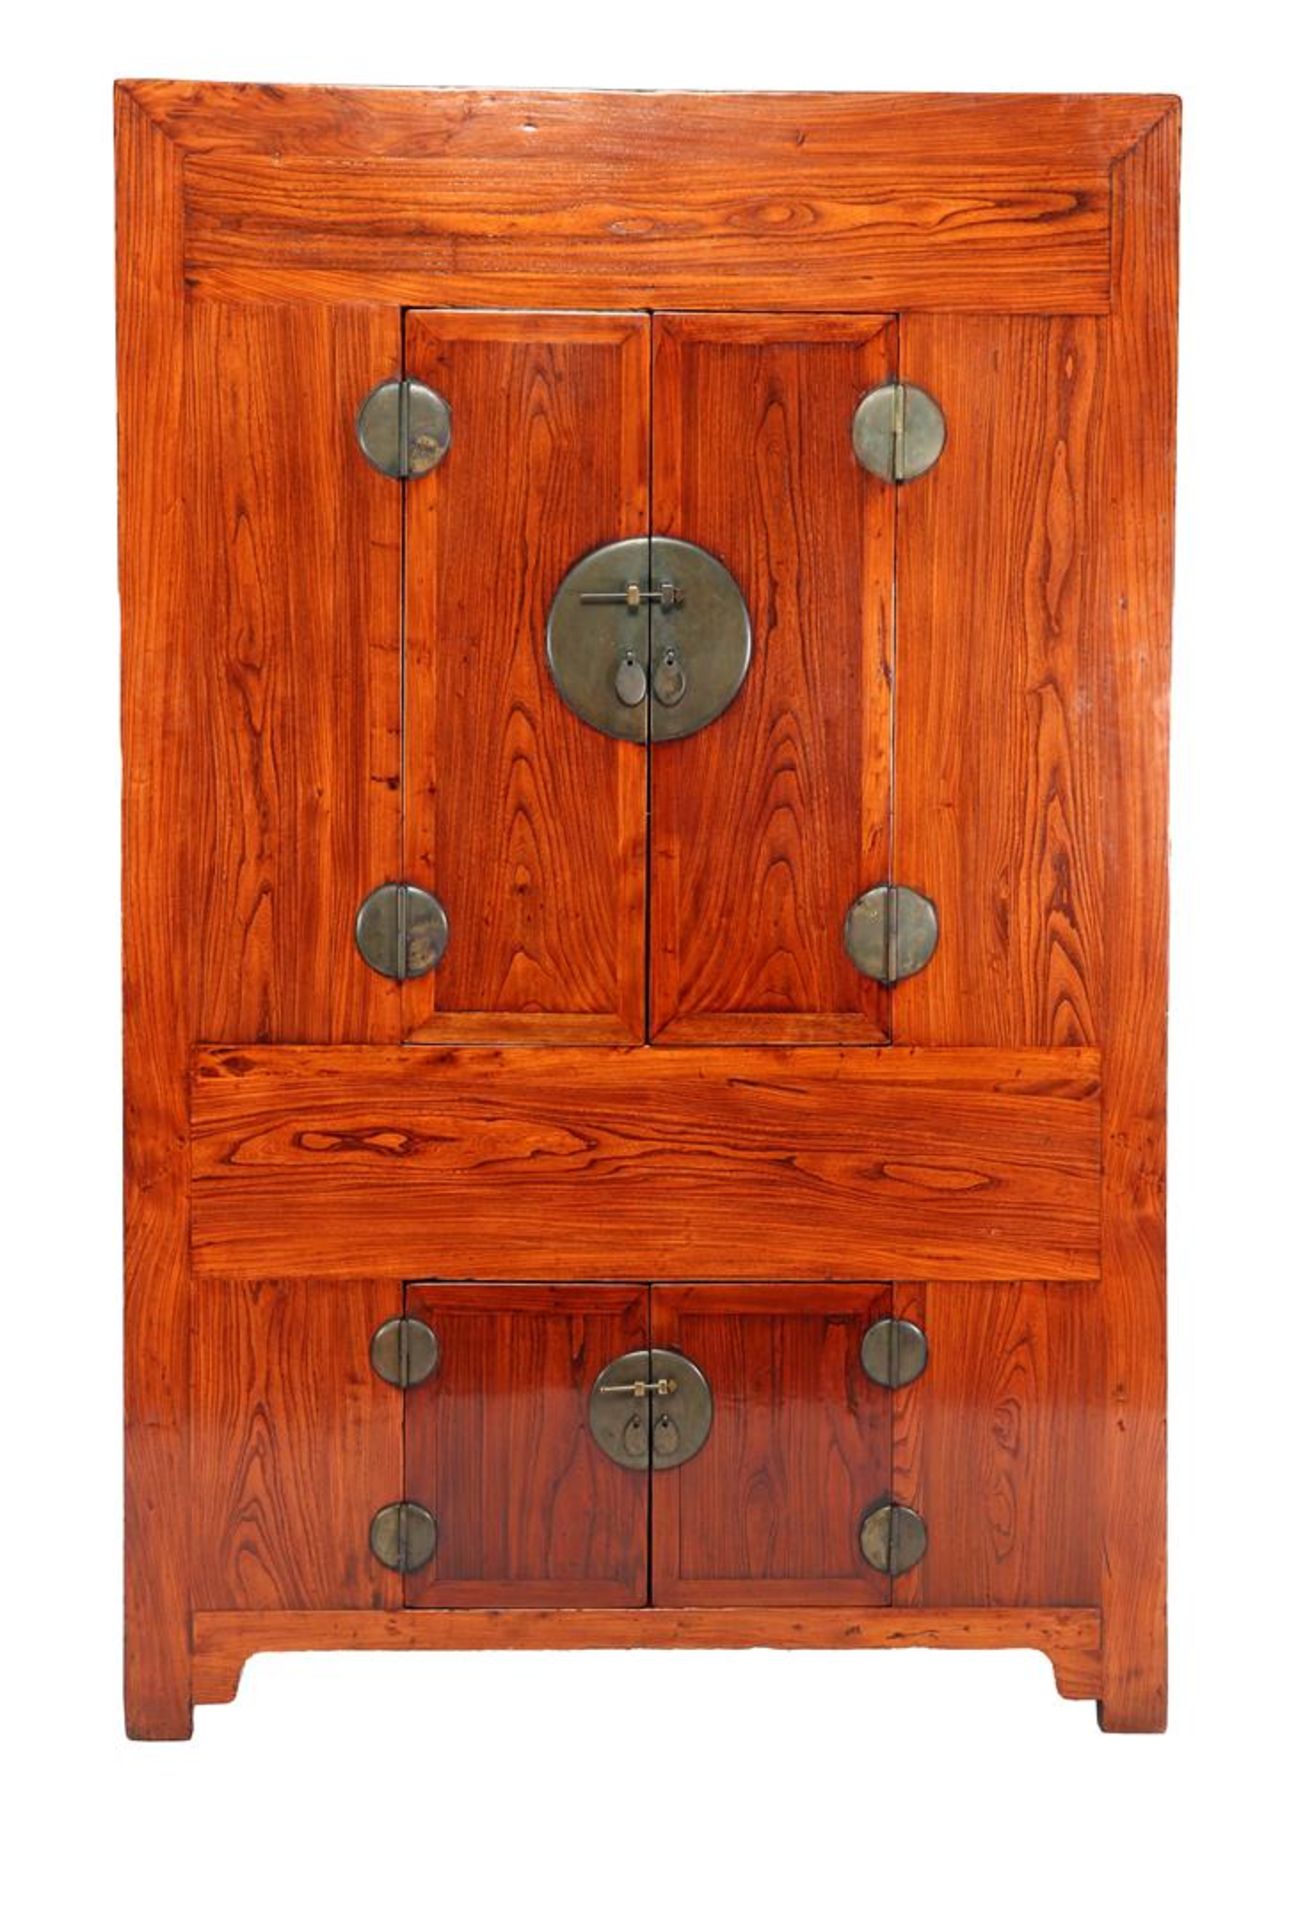 Teak Chinese bridal cabinet with 4 doors, 201 cm high, 131.5 cm wide and 54 cm deep